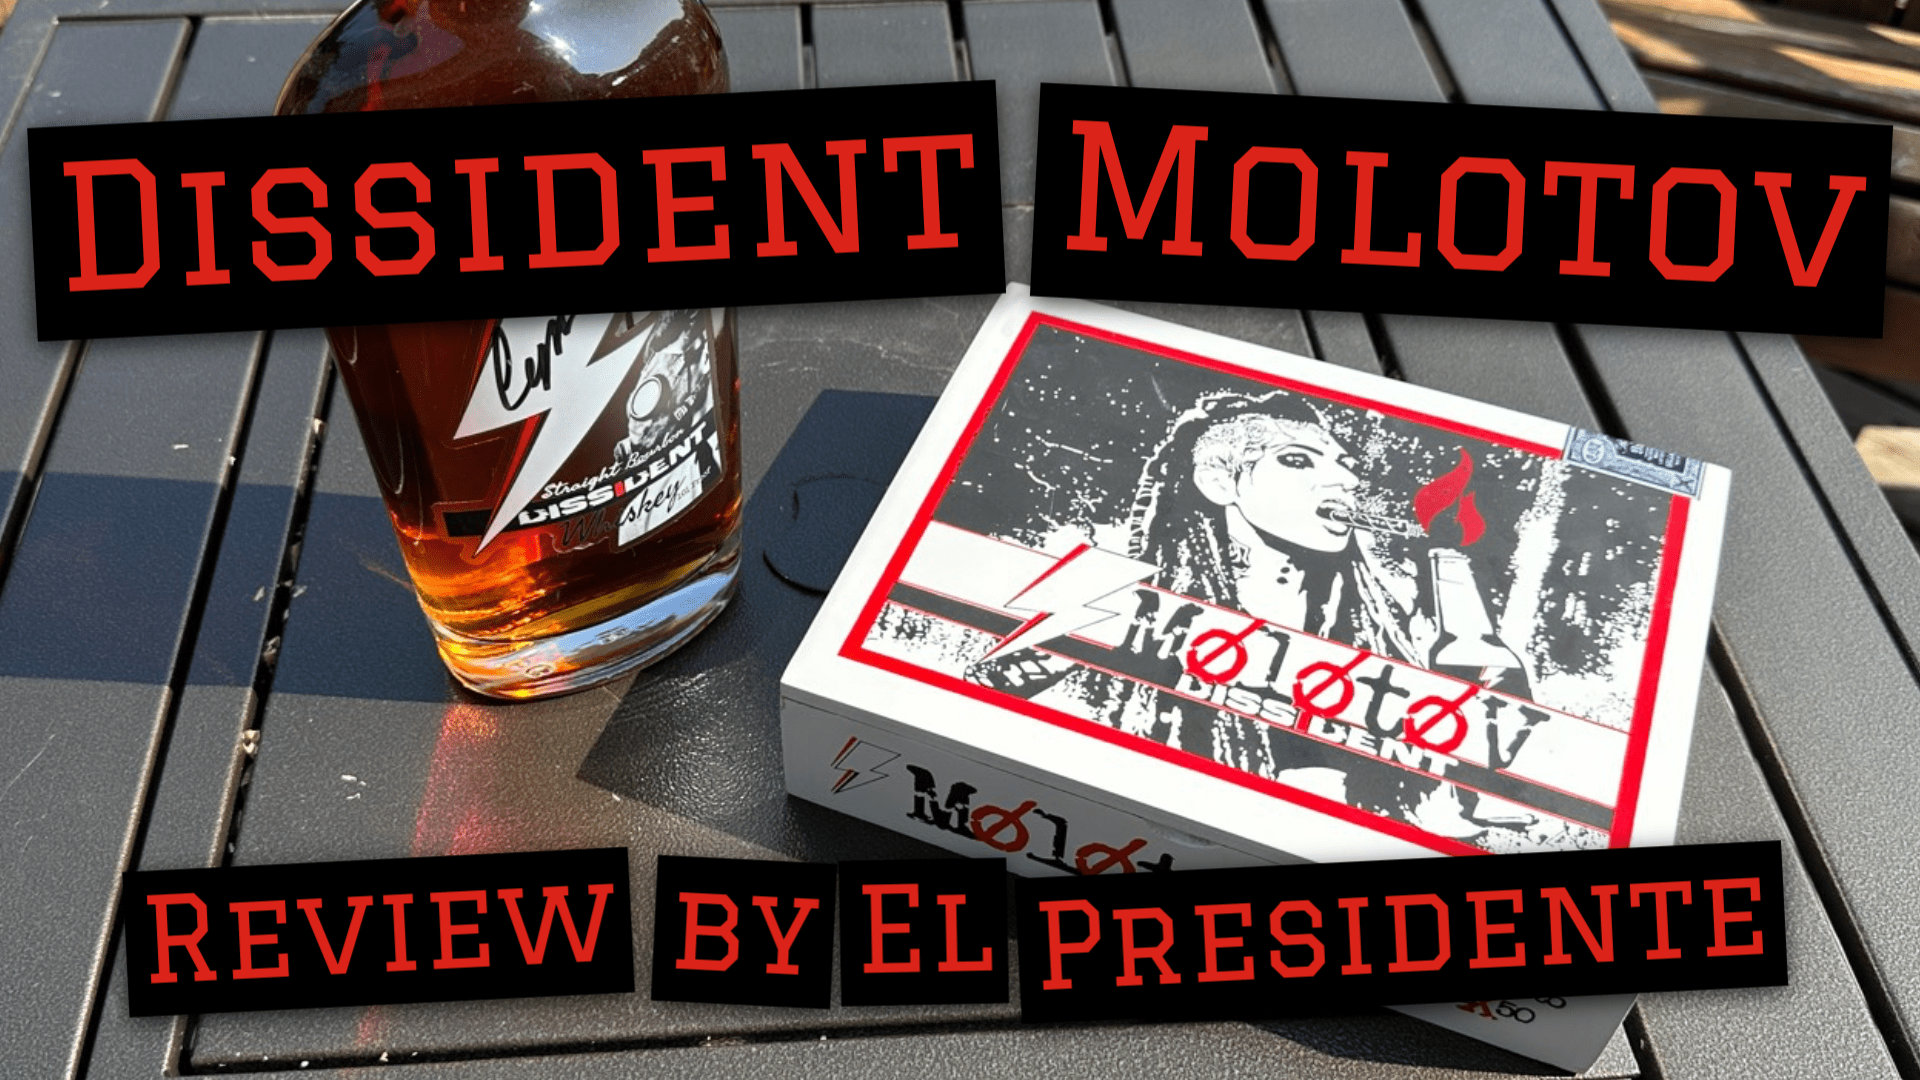 DISSIDENT MOLOTOV Reviewed by El Presidente